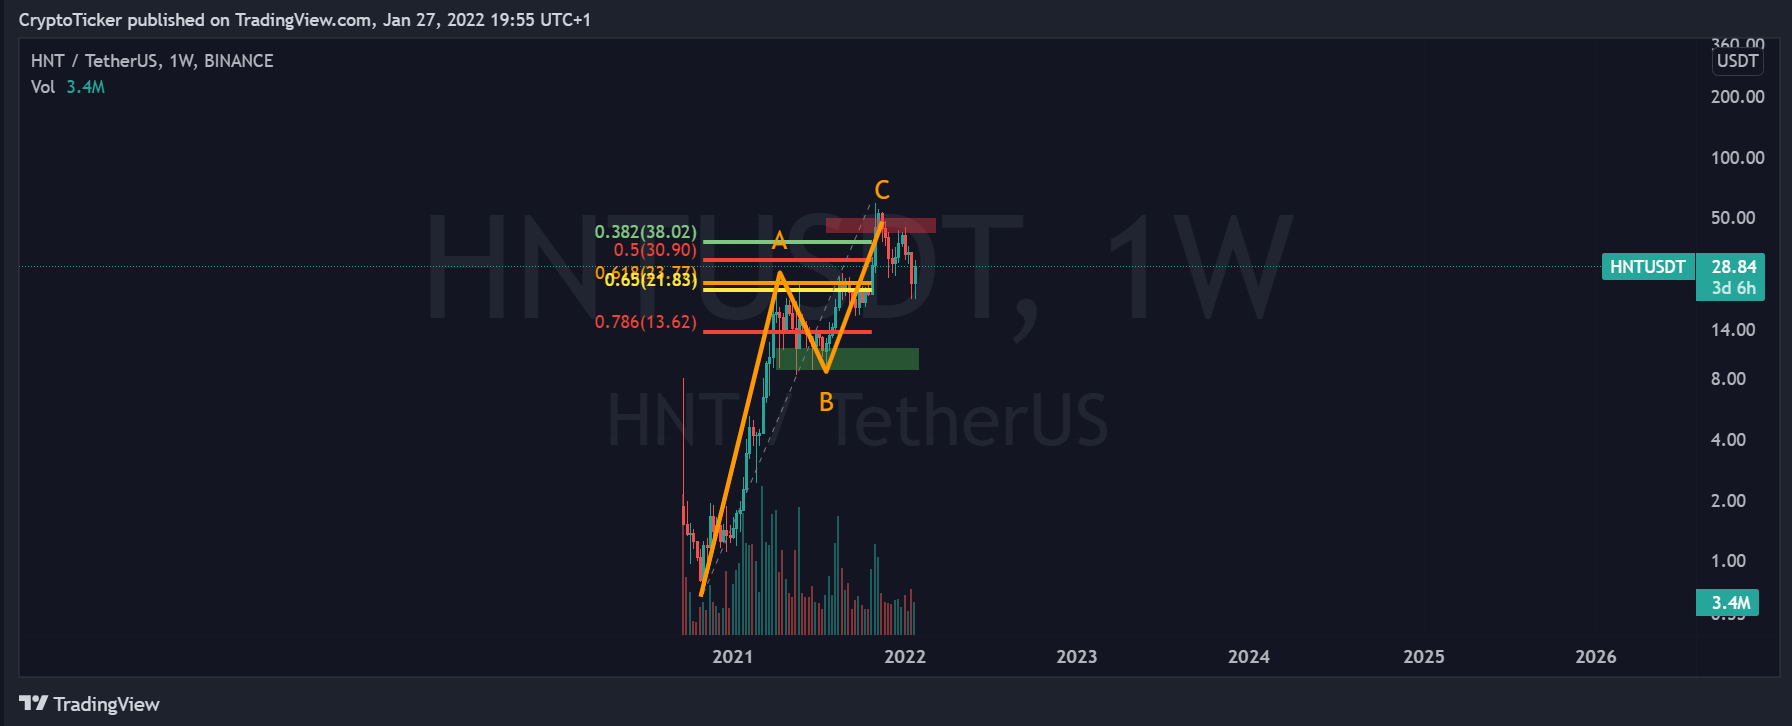 HNT/USDT 1-week chart showing the ABC sequence